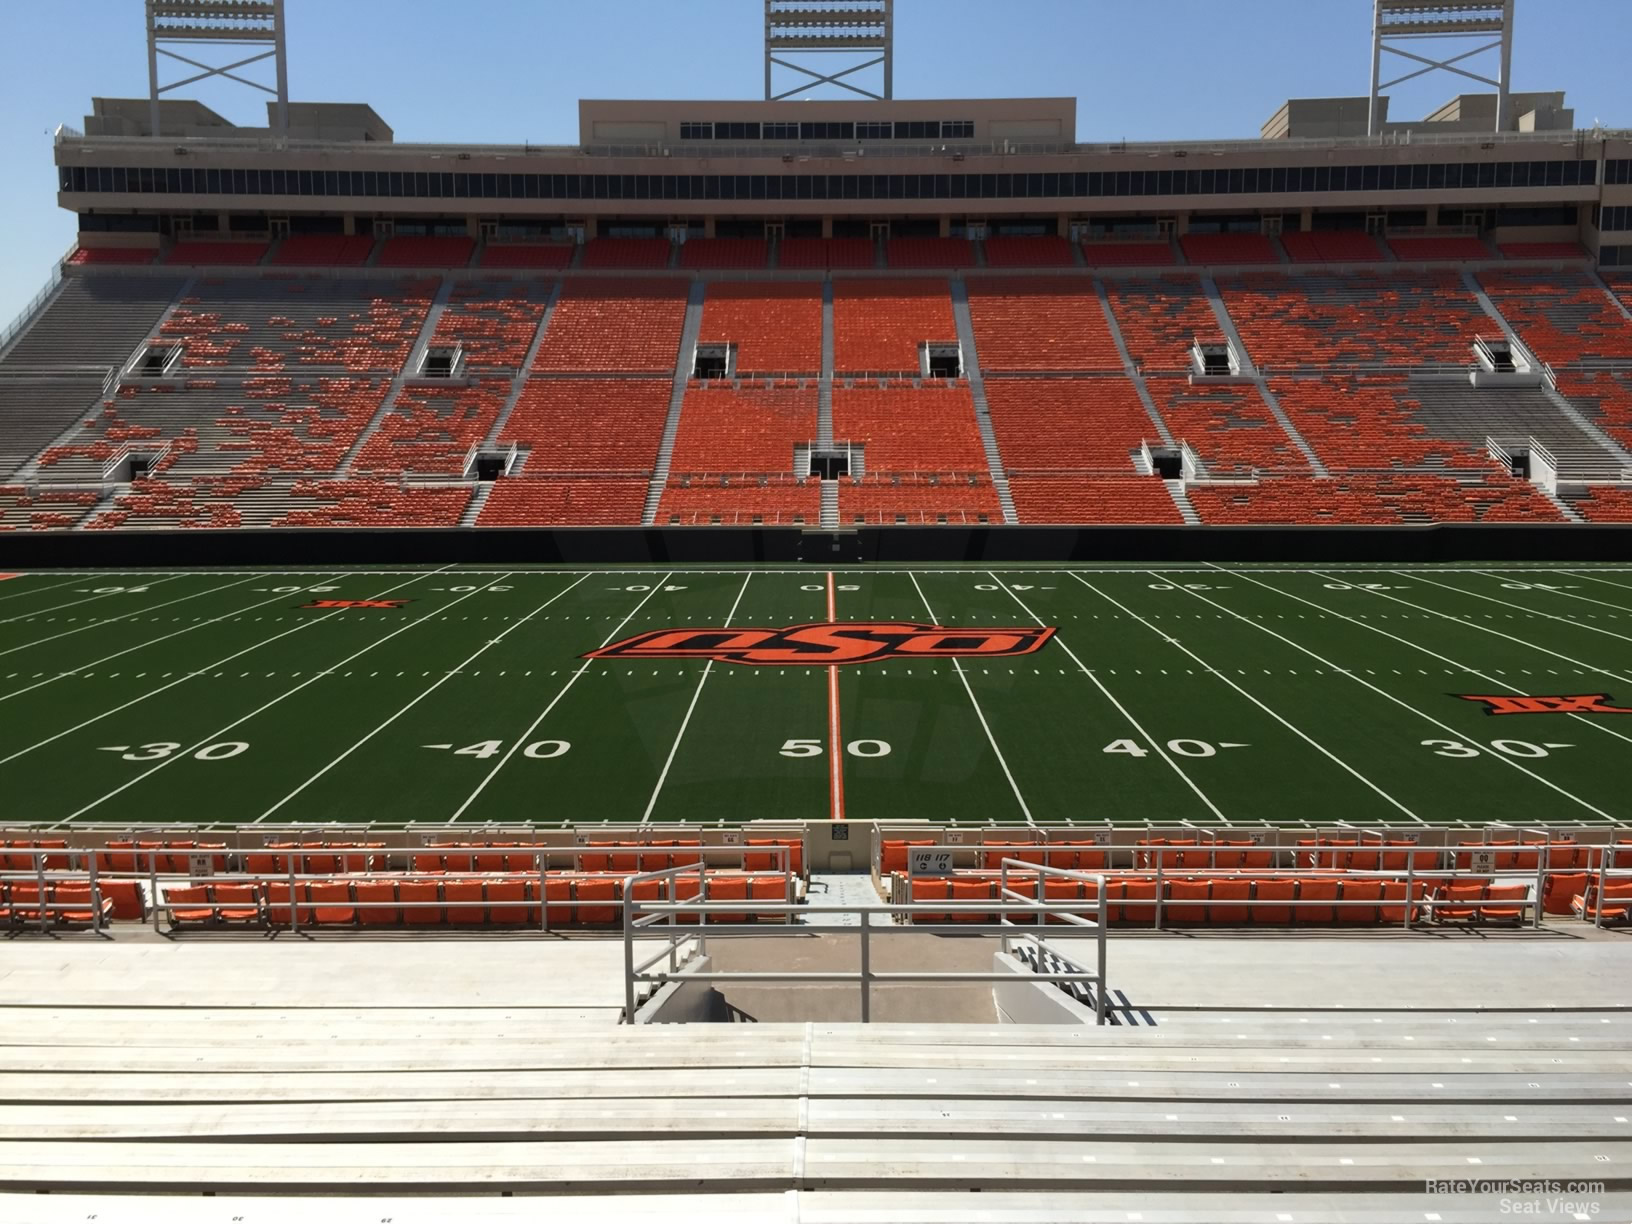 section 225a, row 20 seat view  - boone pickens stadium